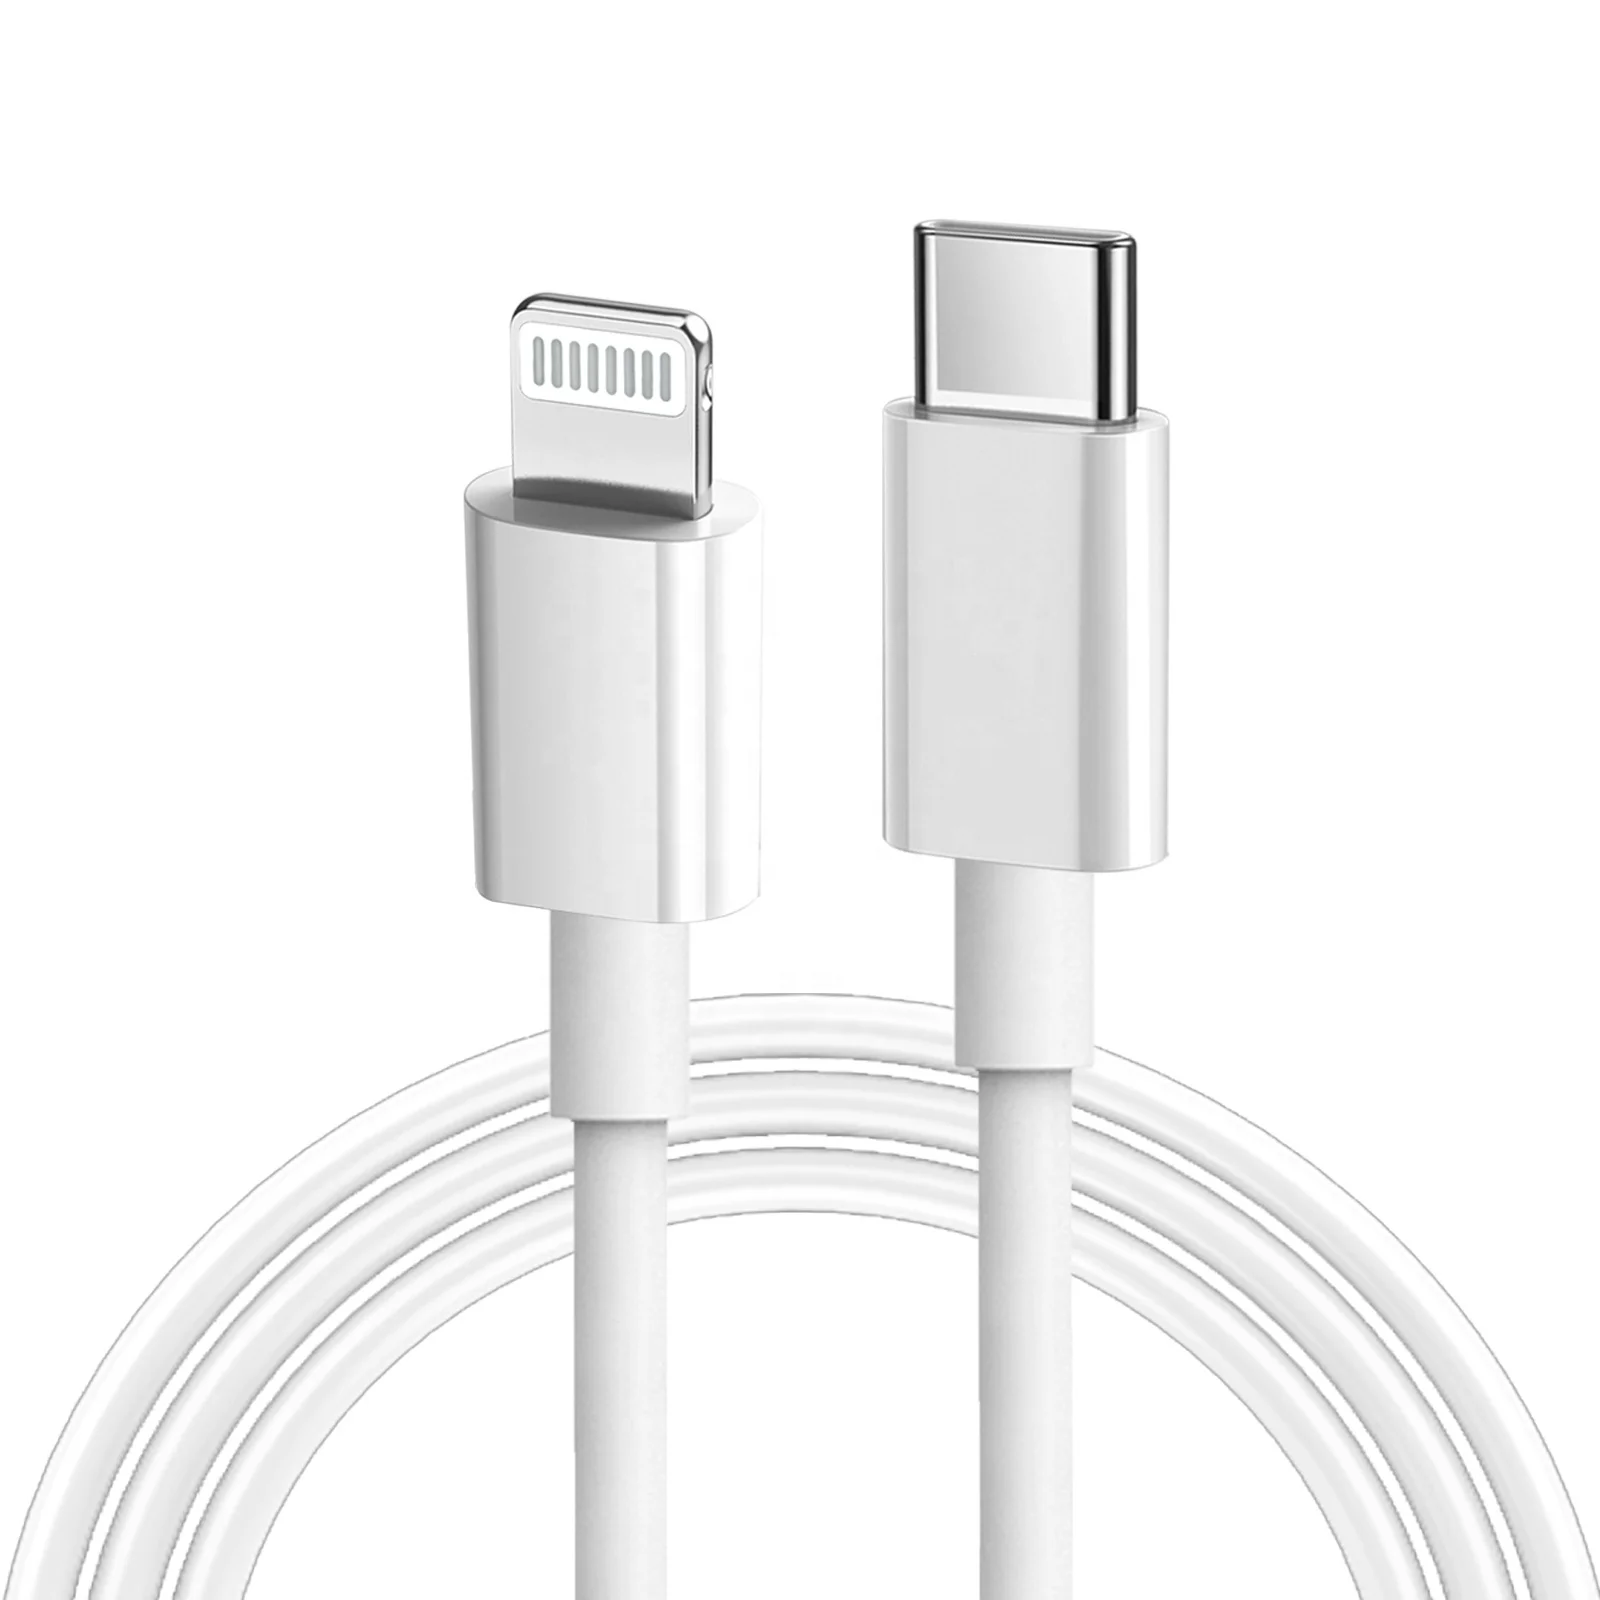 2019 New style   USB Type-C  cable data  MFi certified USB cable for iphone